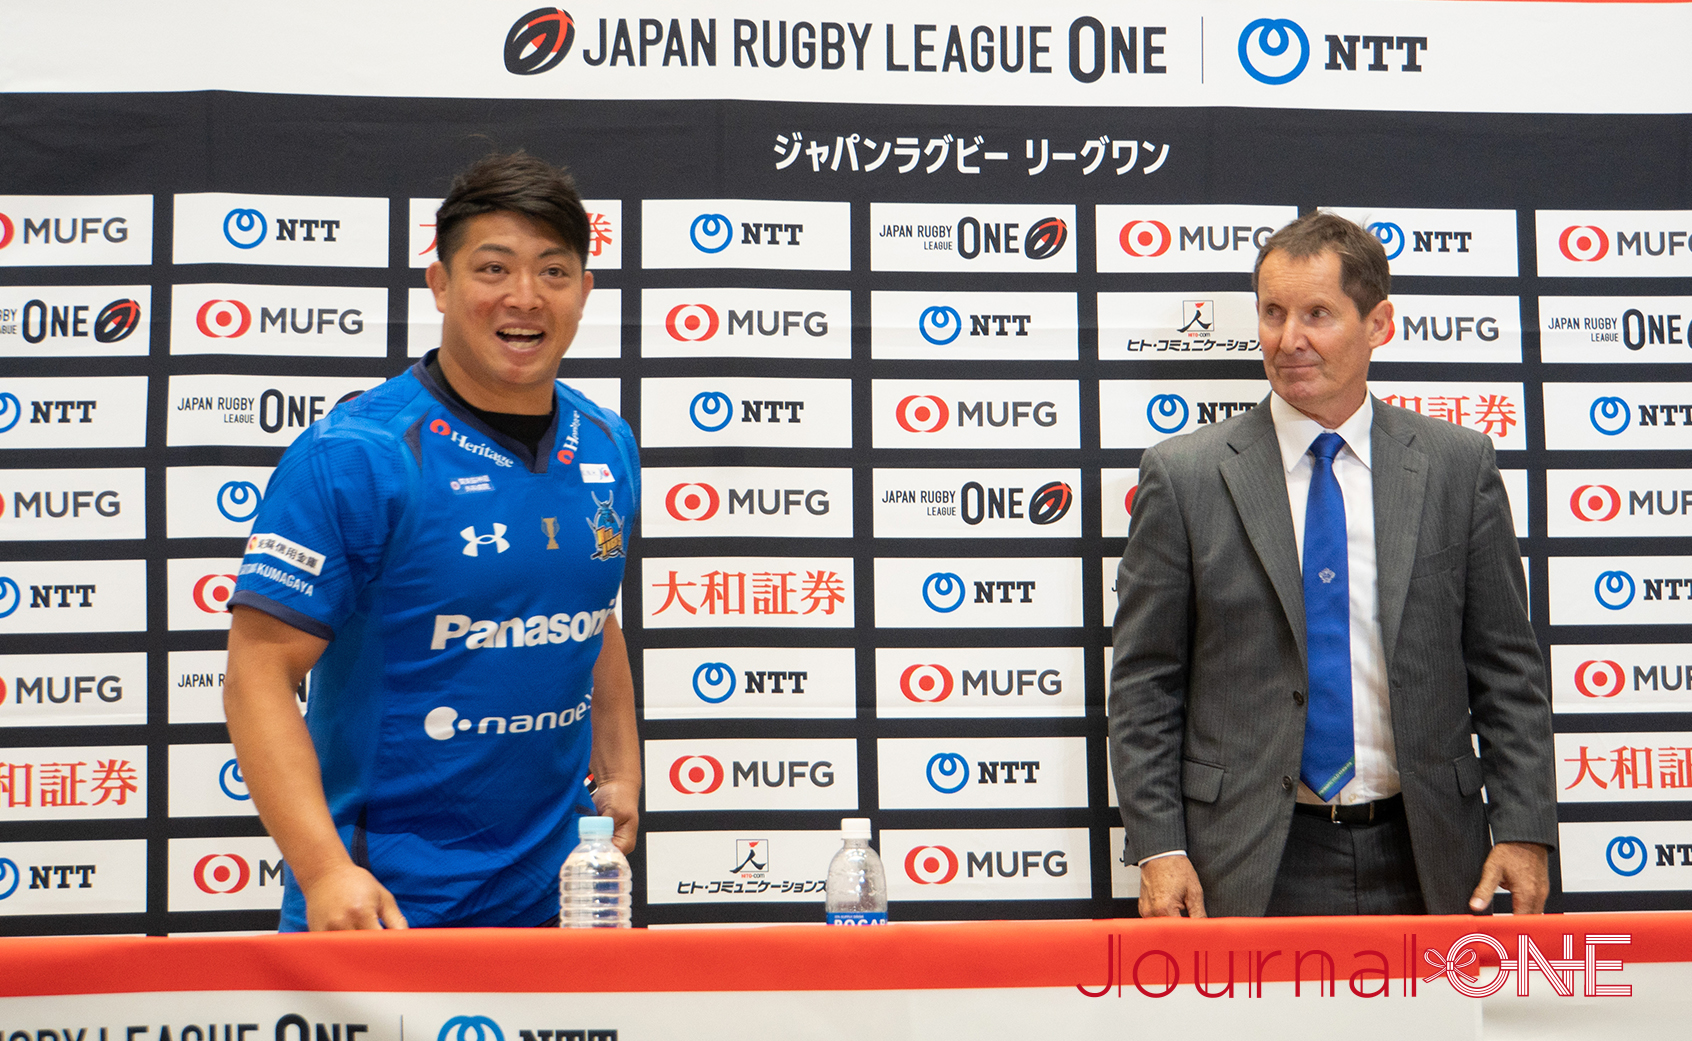 Japan Rugby League One final match, “Today, there were a lot of mistakes, and they play we did, was not one that deserved to win. The pressure of the Spears was tough, but our panic was the main problem. There was a time where mistakes birthed mistakes, and it was like a chain,” said Atsushi Sakate, captain of the Wild Knights.; Photo by Journal-ONE